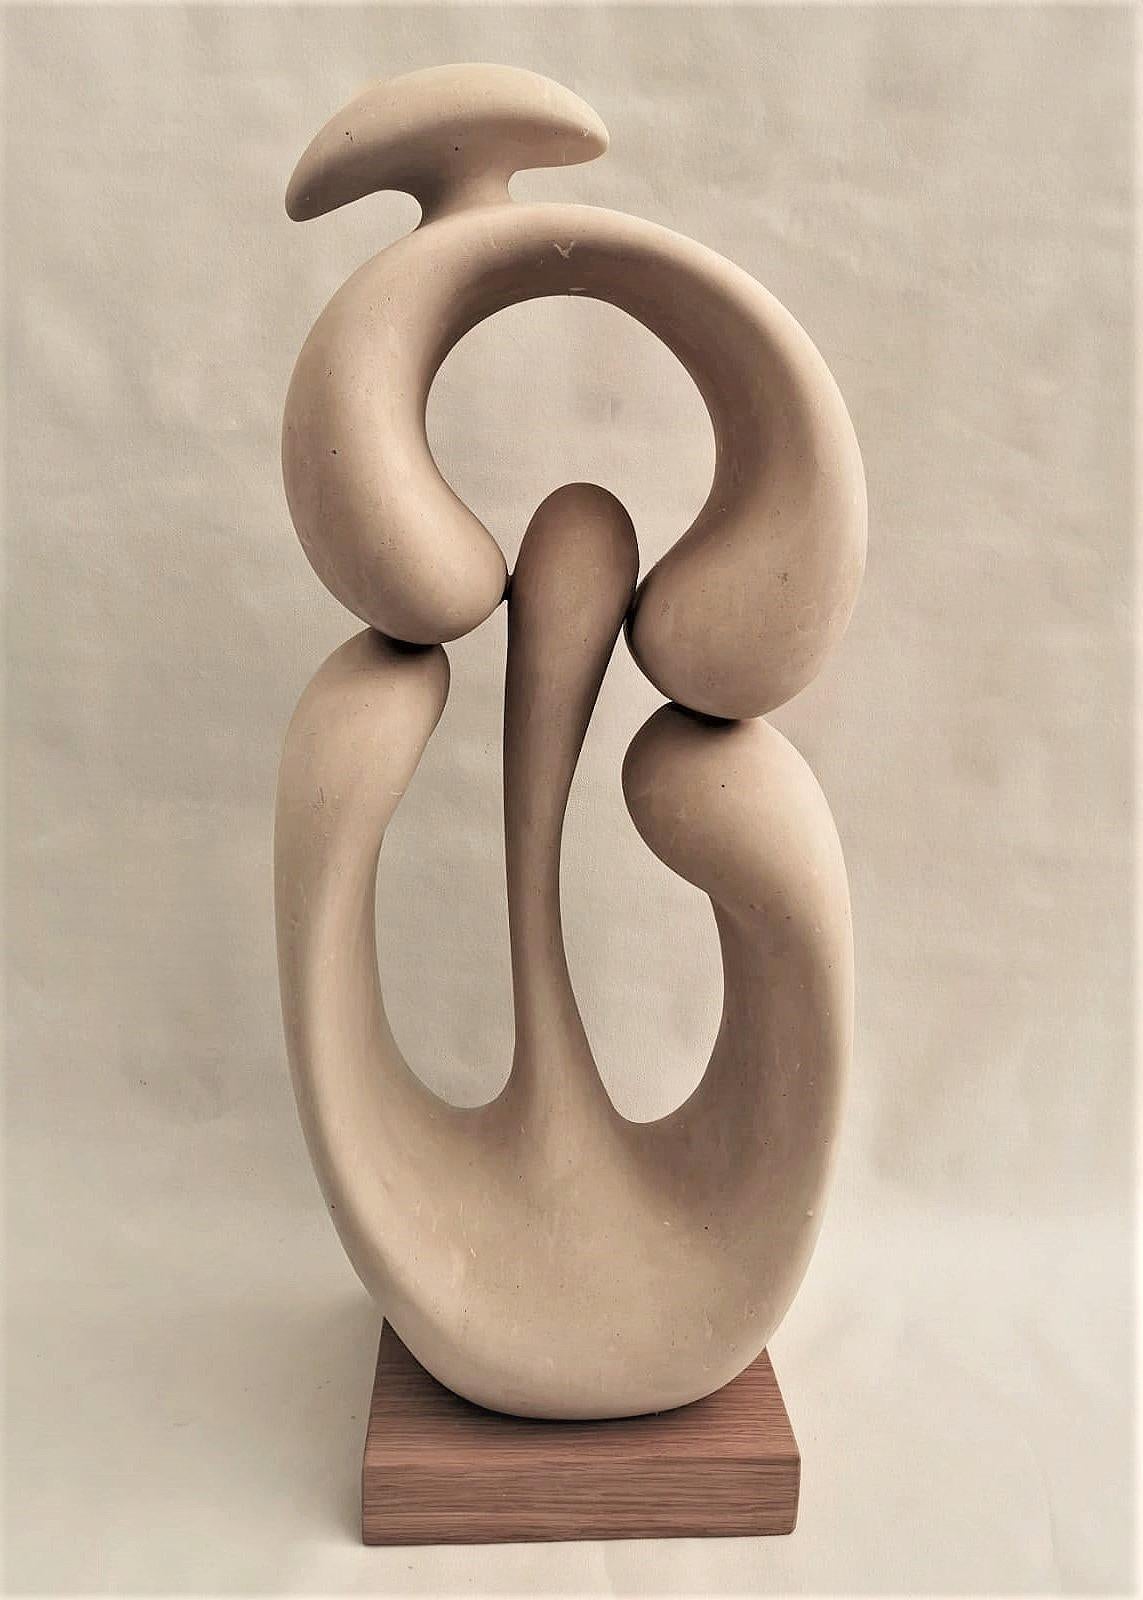 21st century abstract sculpture ILOVEU by Renzo Buttazzo from Italy

Sculpture in Lecce Stone
Delivered with a certificate of authenticity.

Since 1886 Renzo Buttazzo work with Pietra Leccese (limestone from Lecce), and during this time he combined